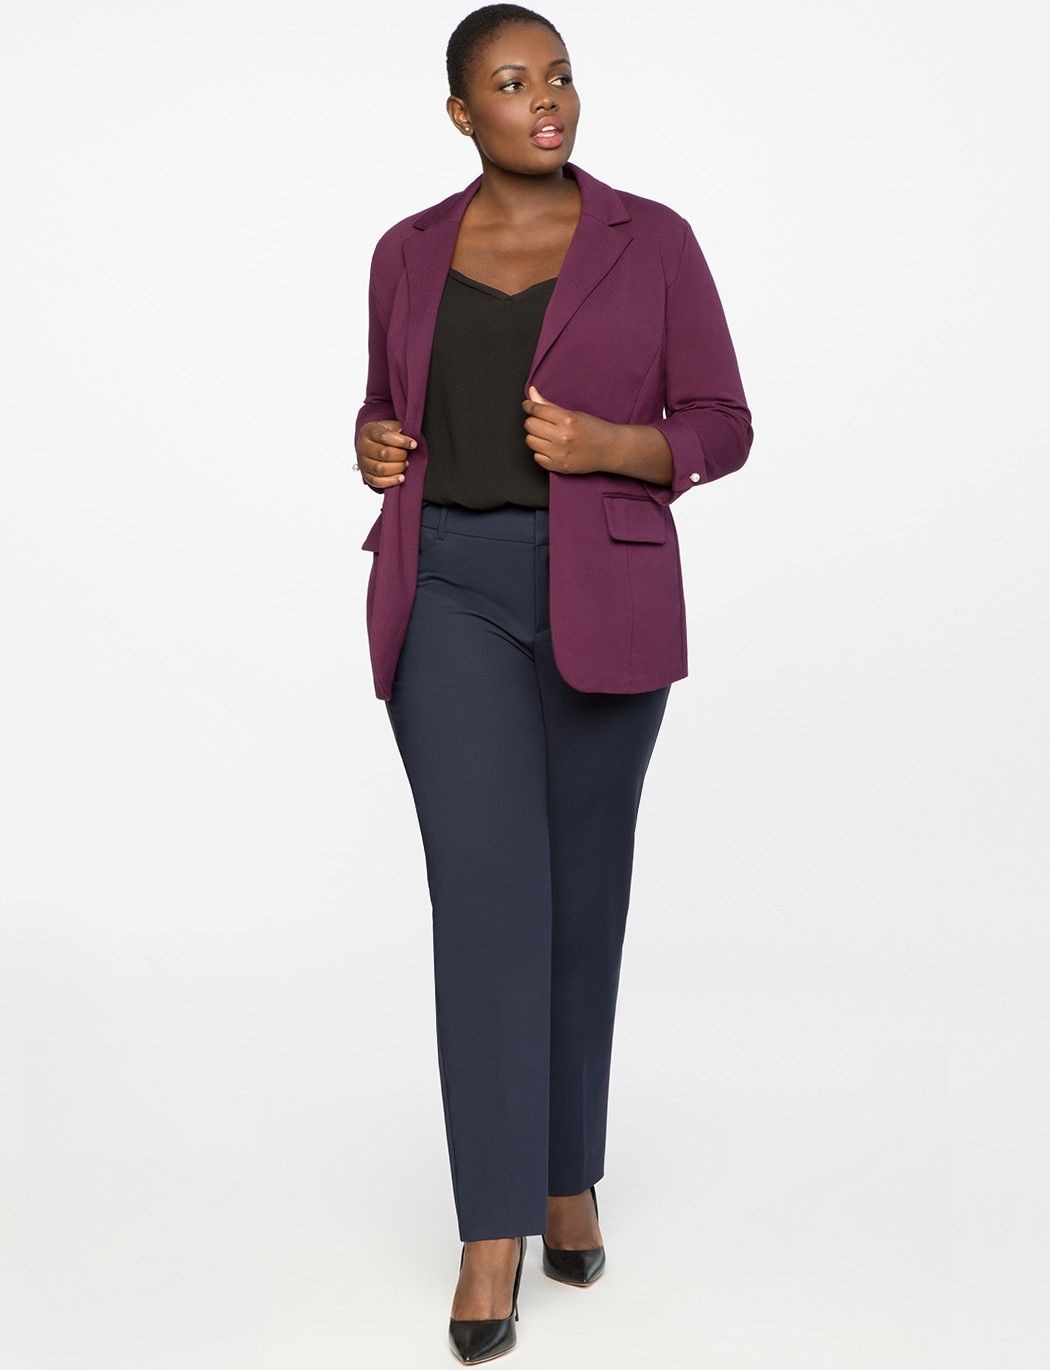 Beautiful Formal Attire For Office: Plus size outfit,  Office Outfit,  professional Outfit For Teens,  Trendy Plus Size Work Outfit  